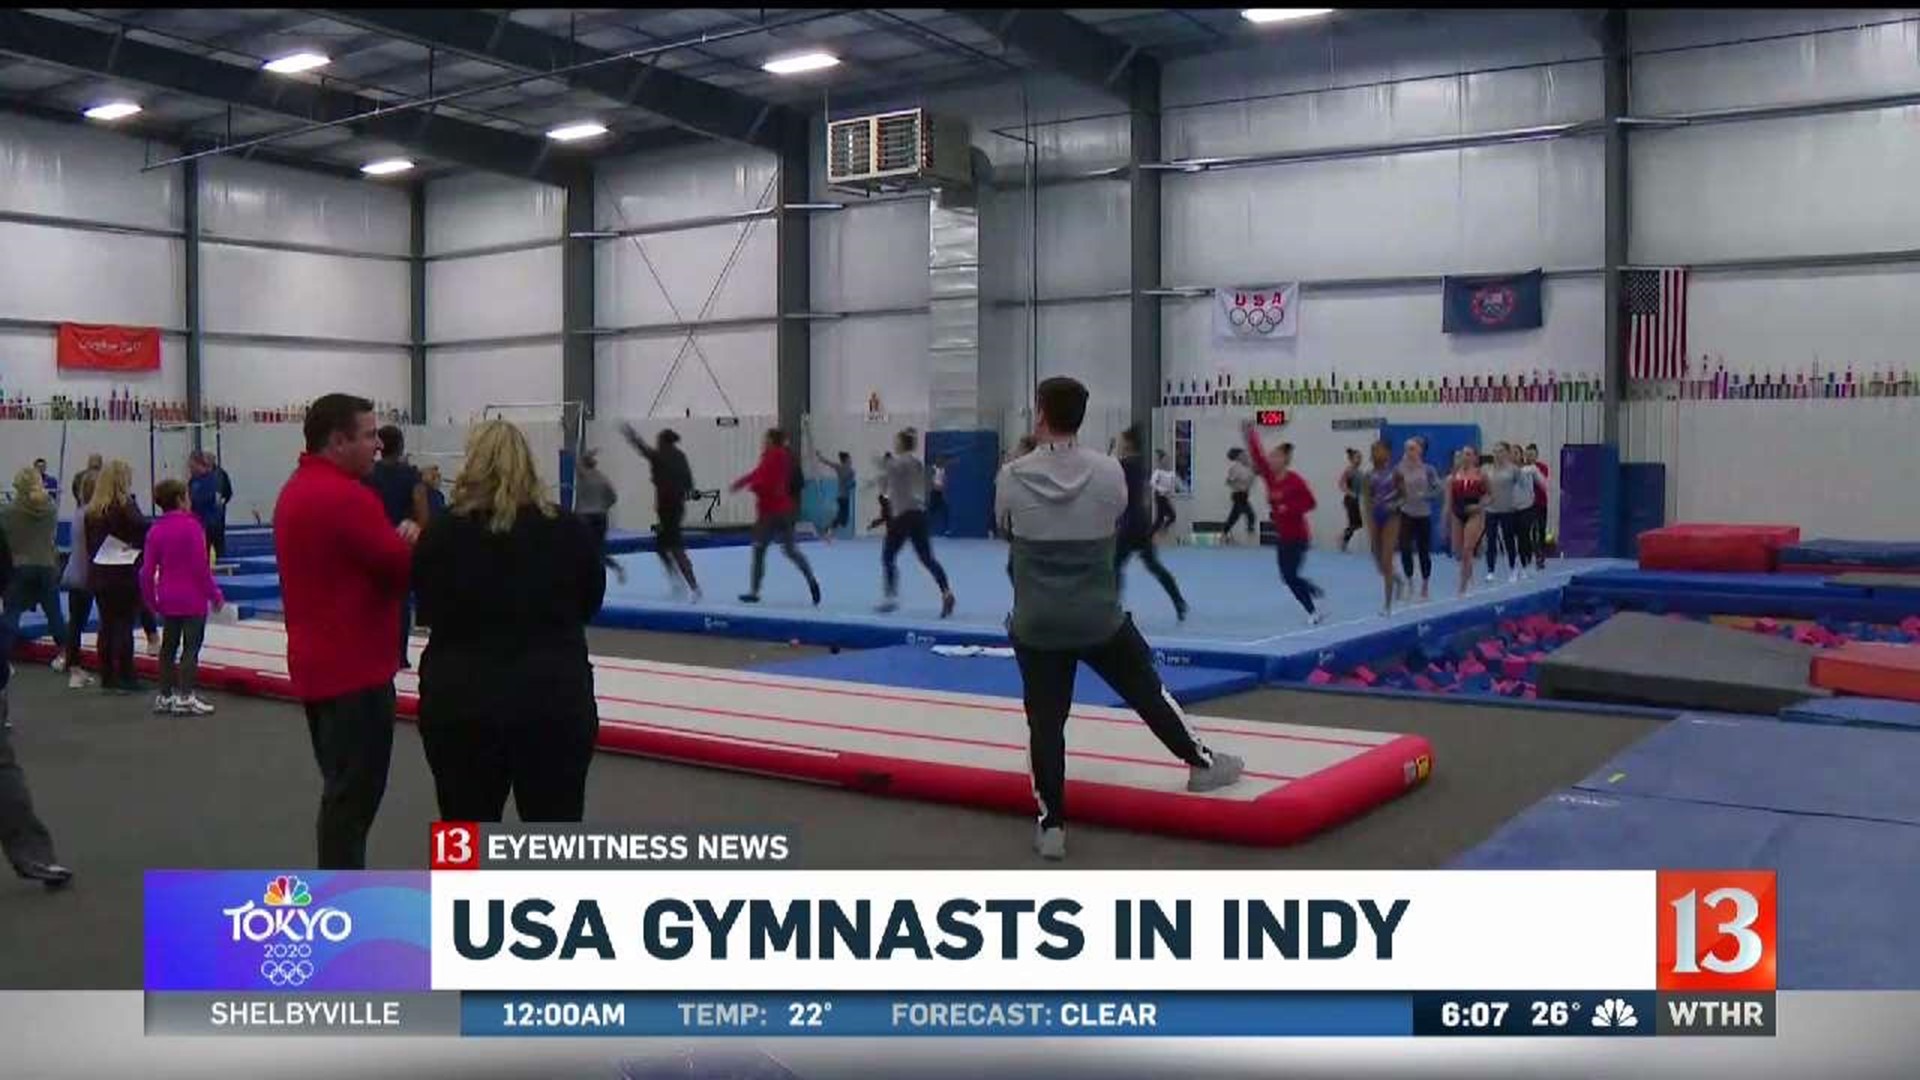 USA gymnasts in Indy